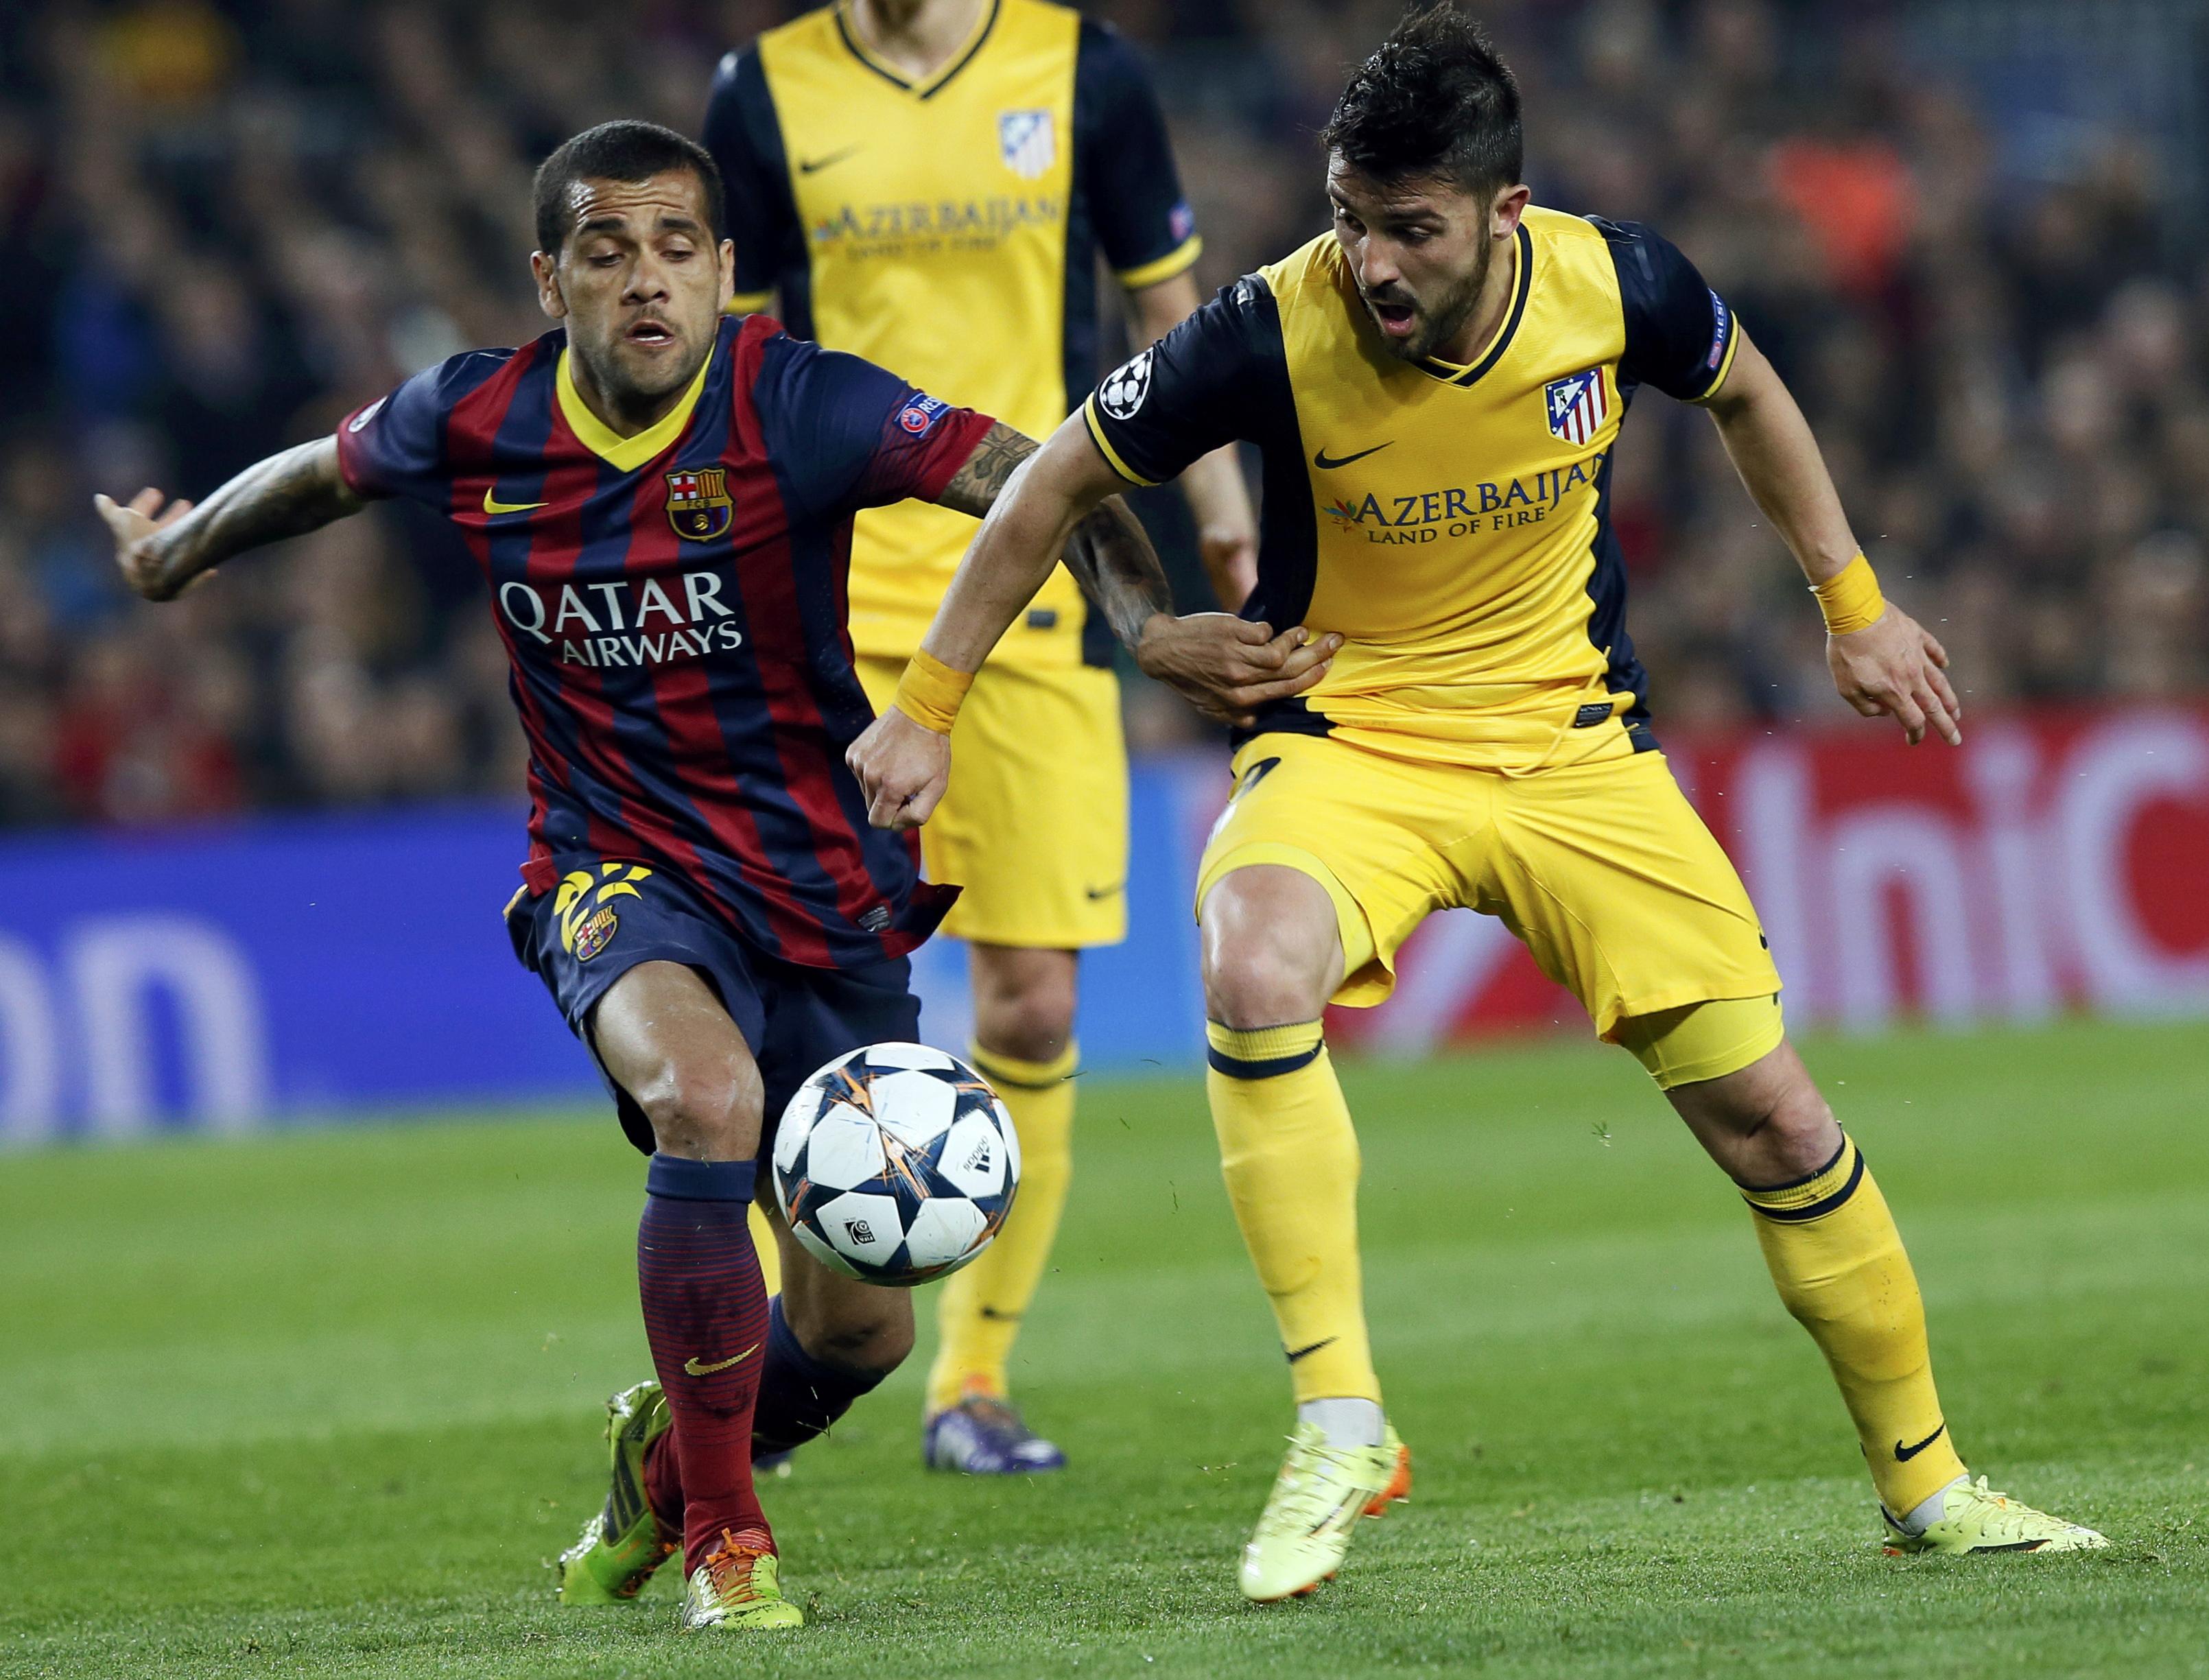 Dazzling goals light up Barca draw with Atletico